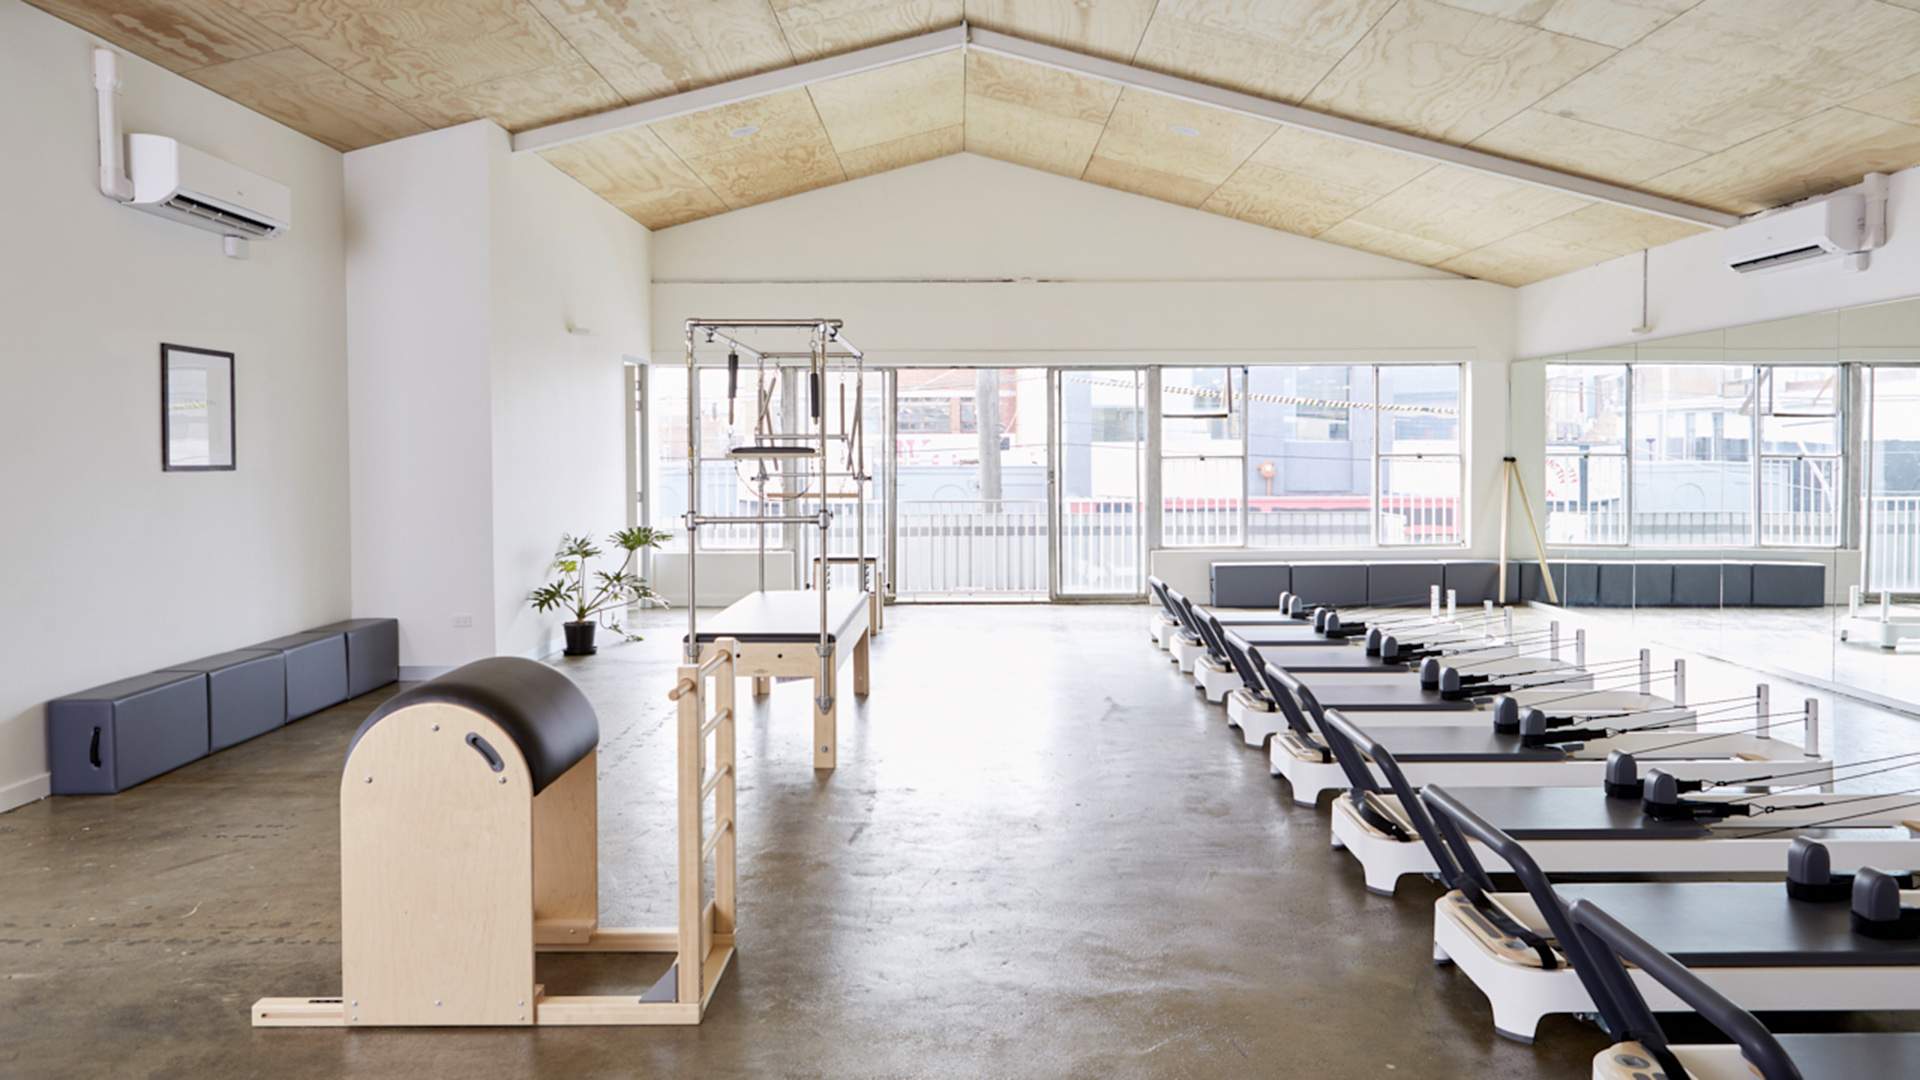 Universal Practice Launches Fitzroy Studio with a Week of Free Classes